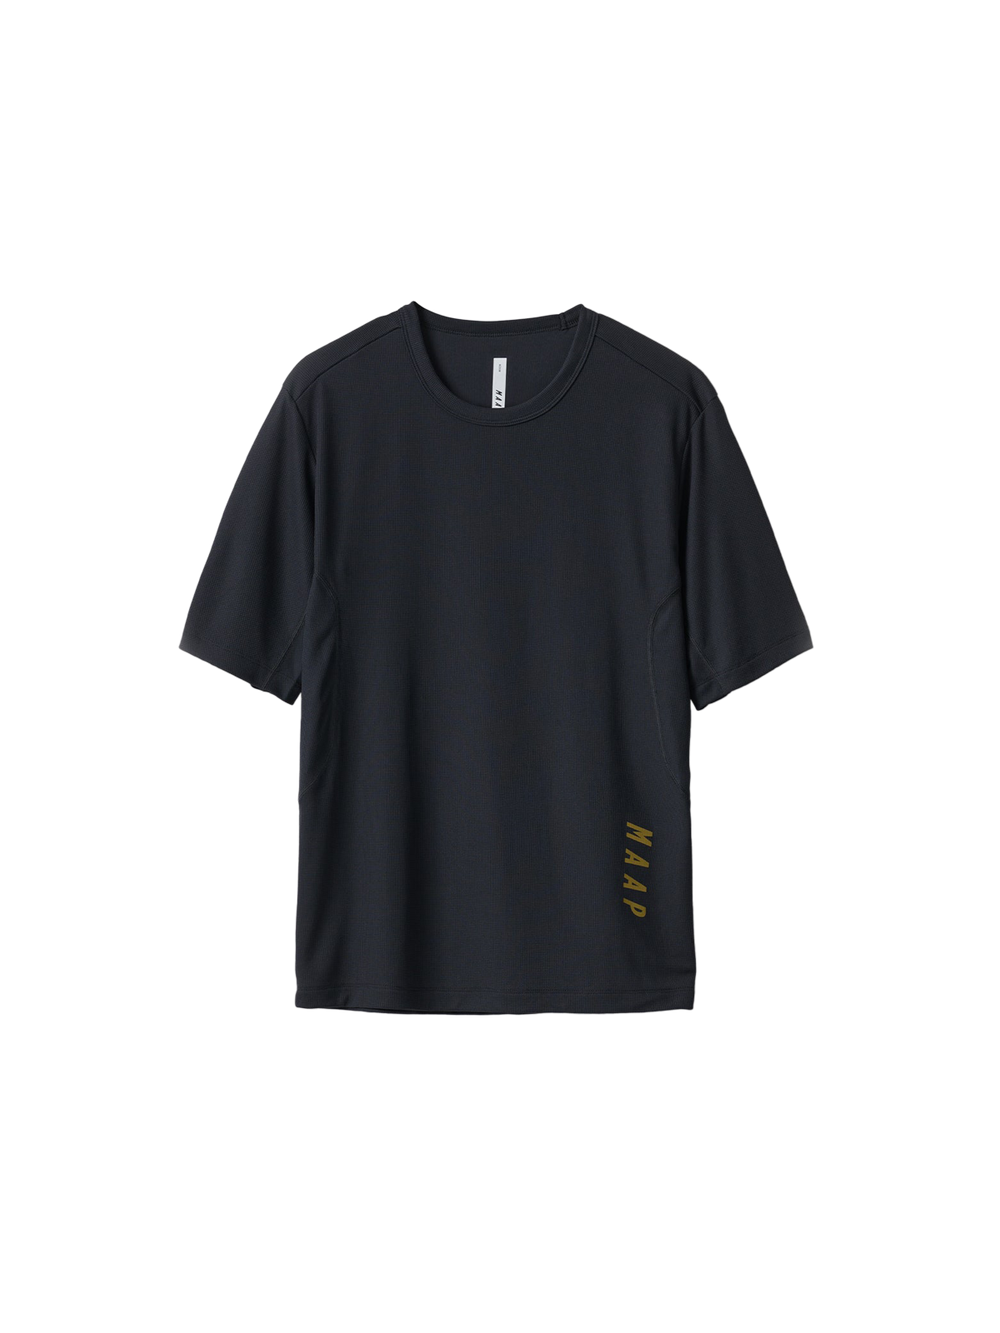 Product Image for Alt_Road Ride Tee 3.0